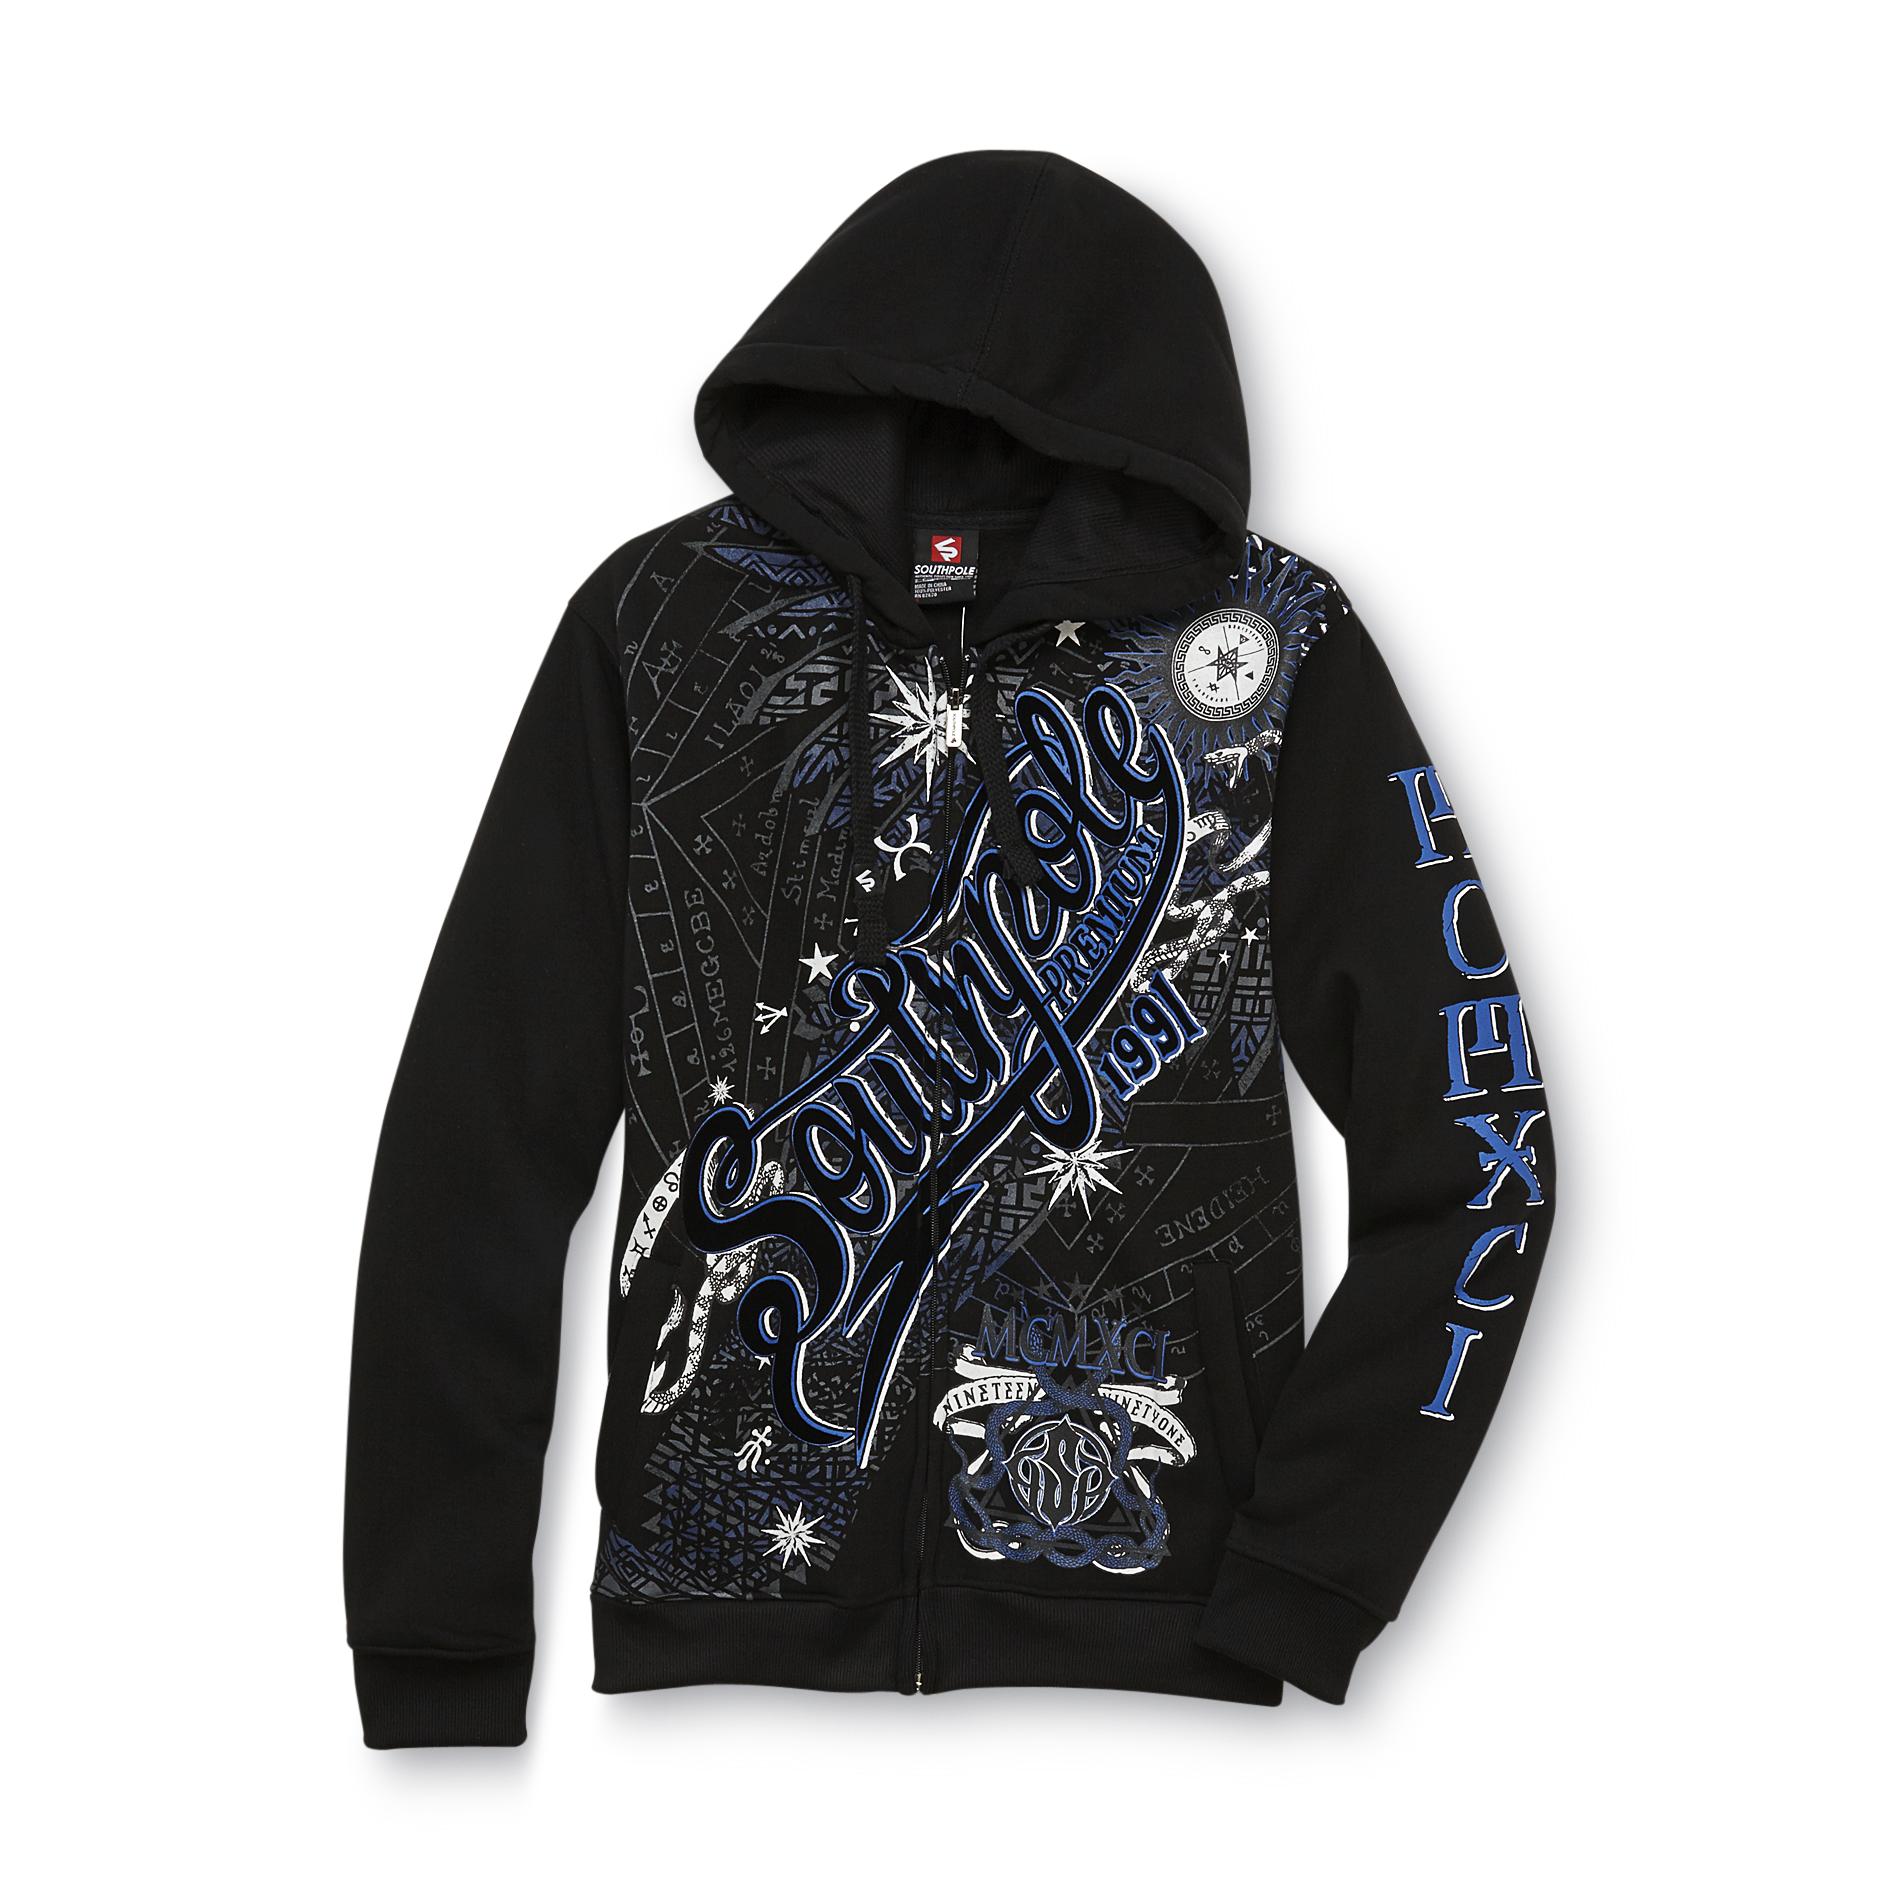 Southpole Young Men's Graphic Hoodie Jacket